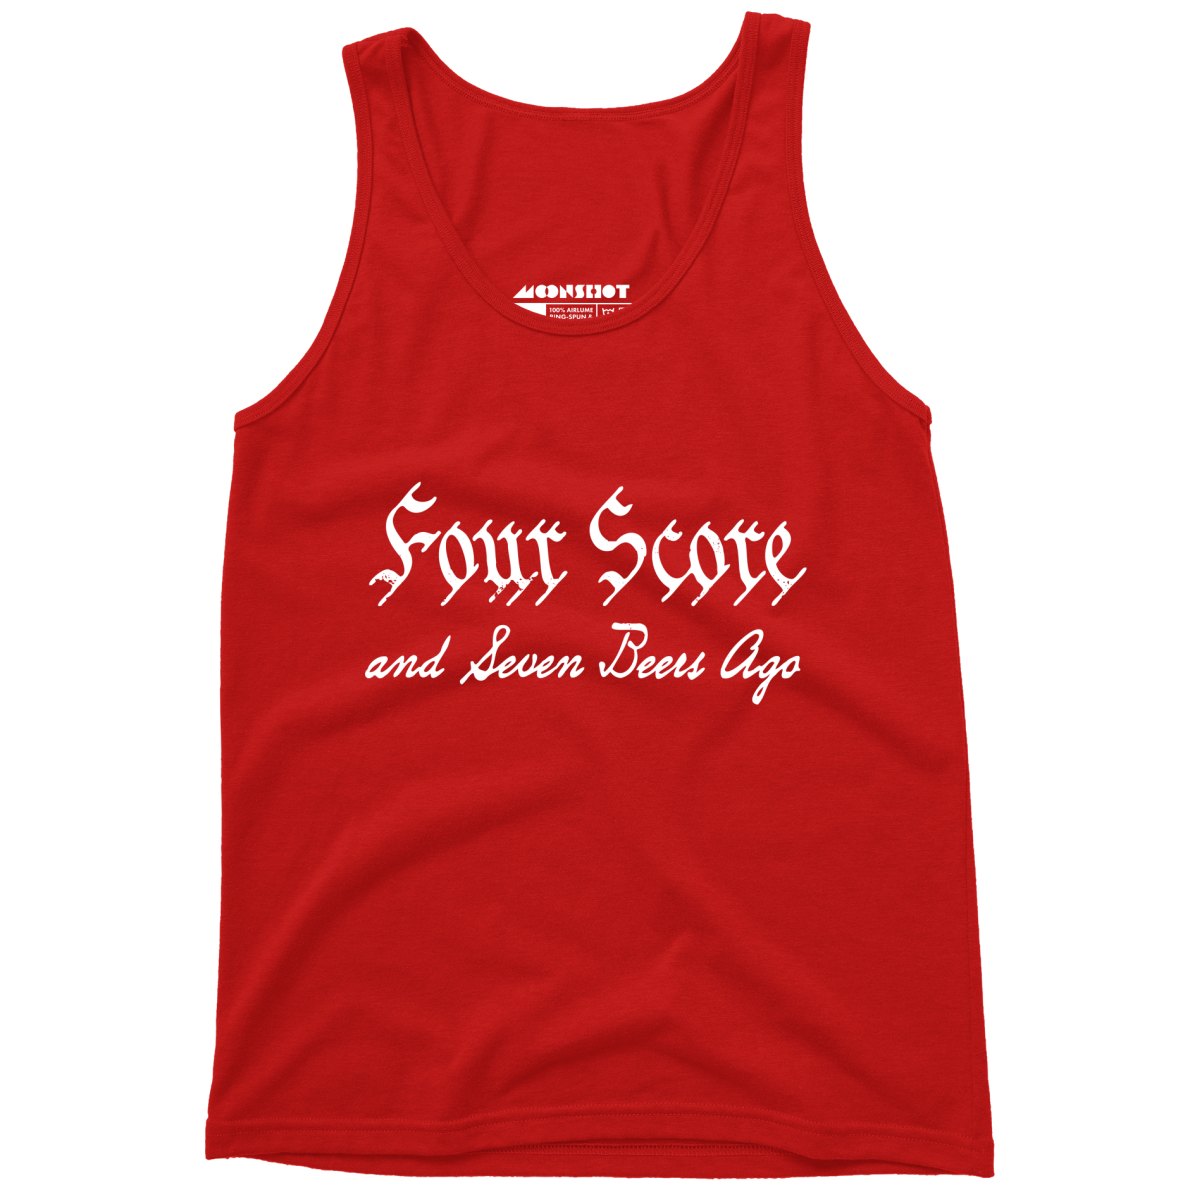 Four Score and Seven Beers Ago - Unisex Tank Top